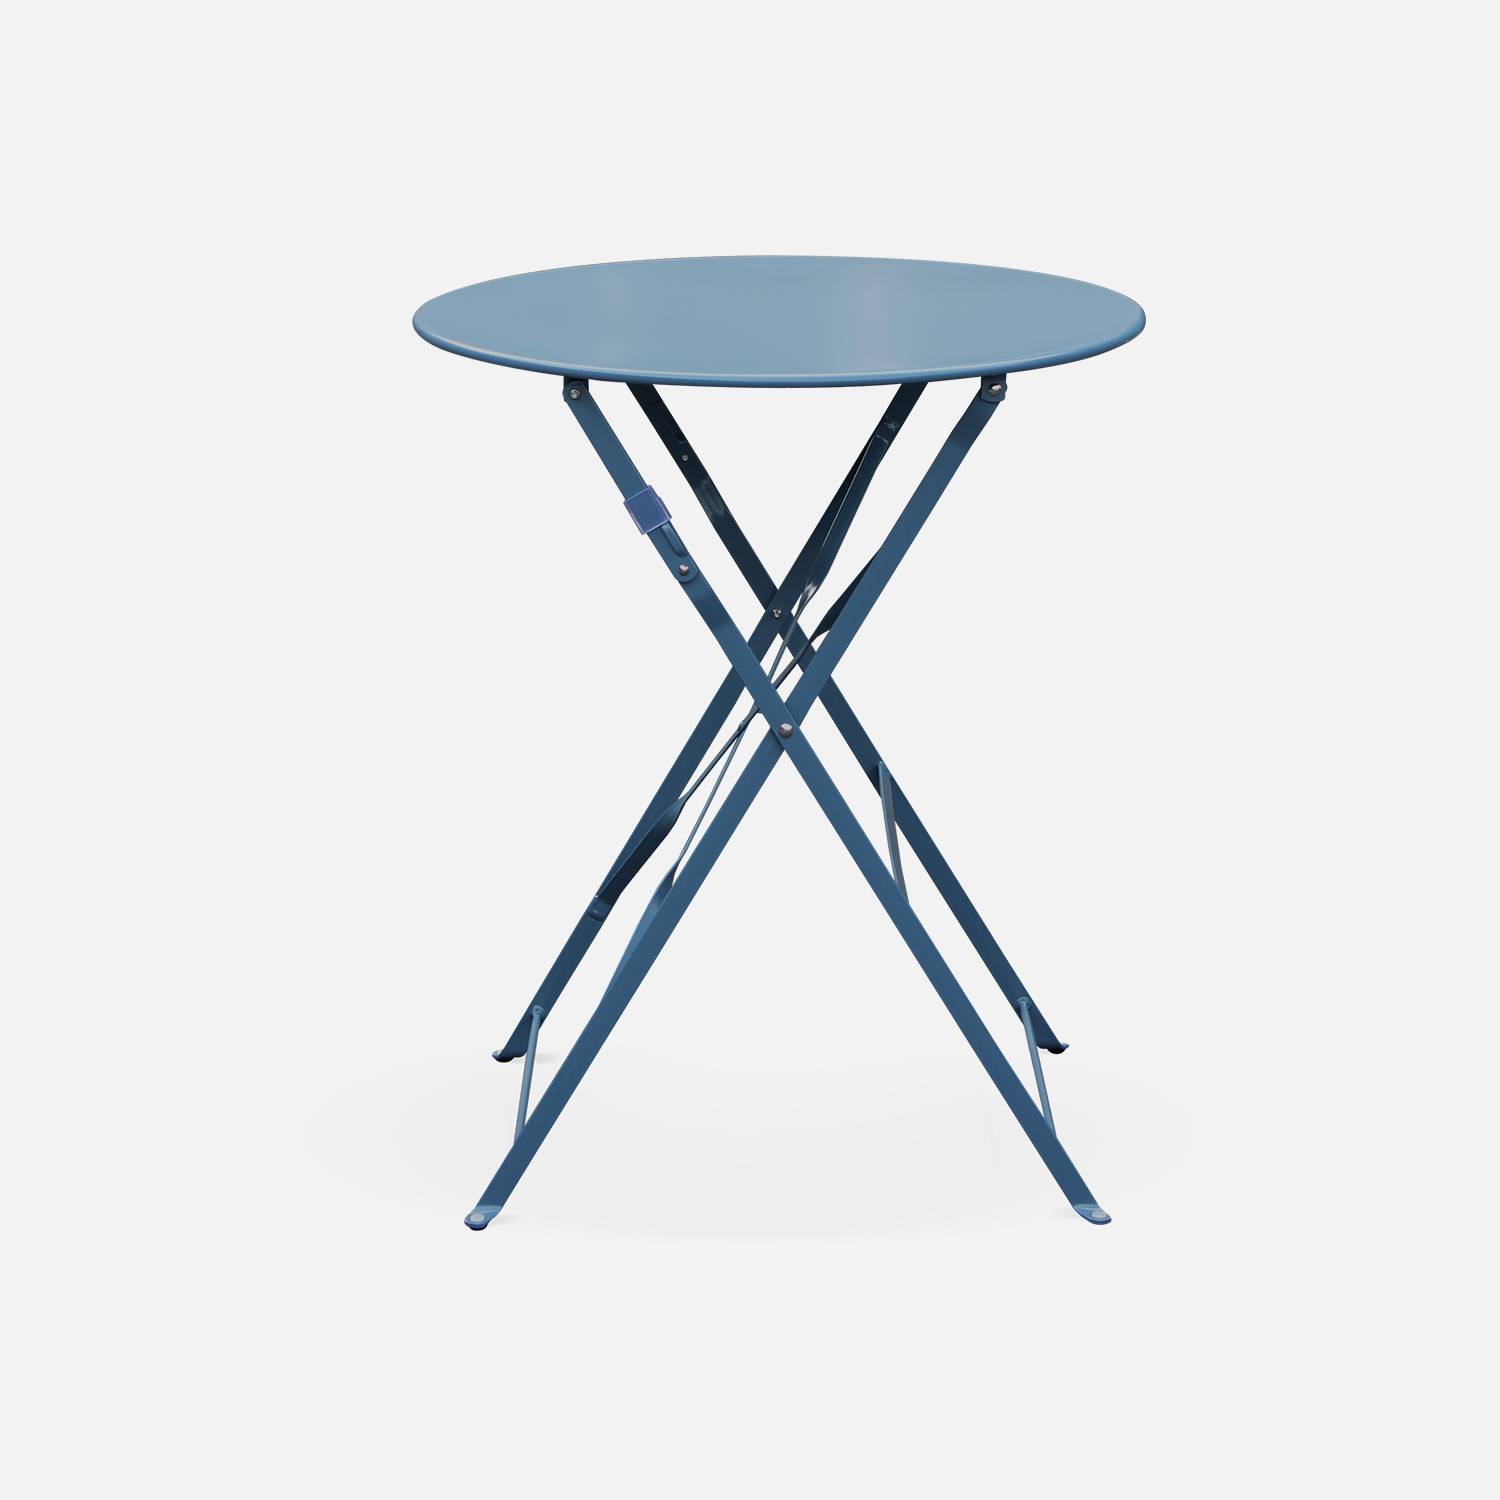 2-seater foldable thermo-lacquered steel bistro garden table with chairs, Ø60cm - Emilia - Grey blue,sweeek,Photo3